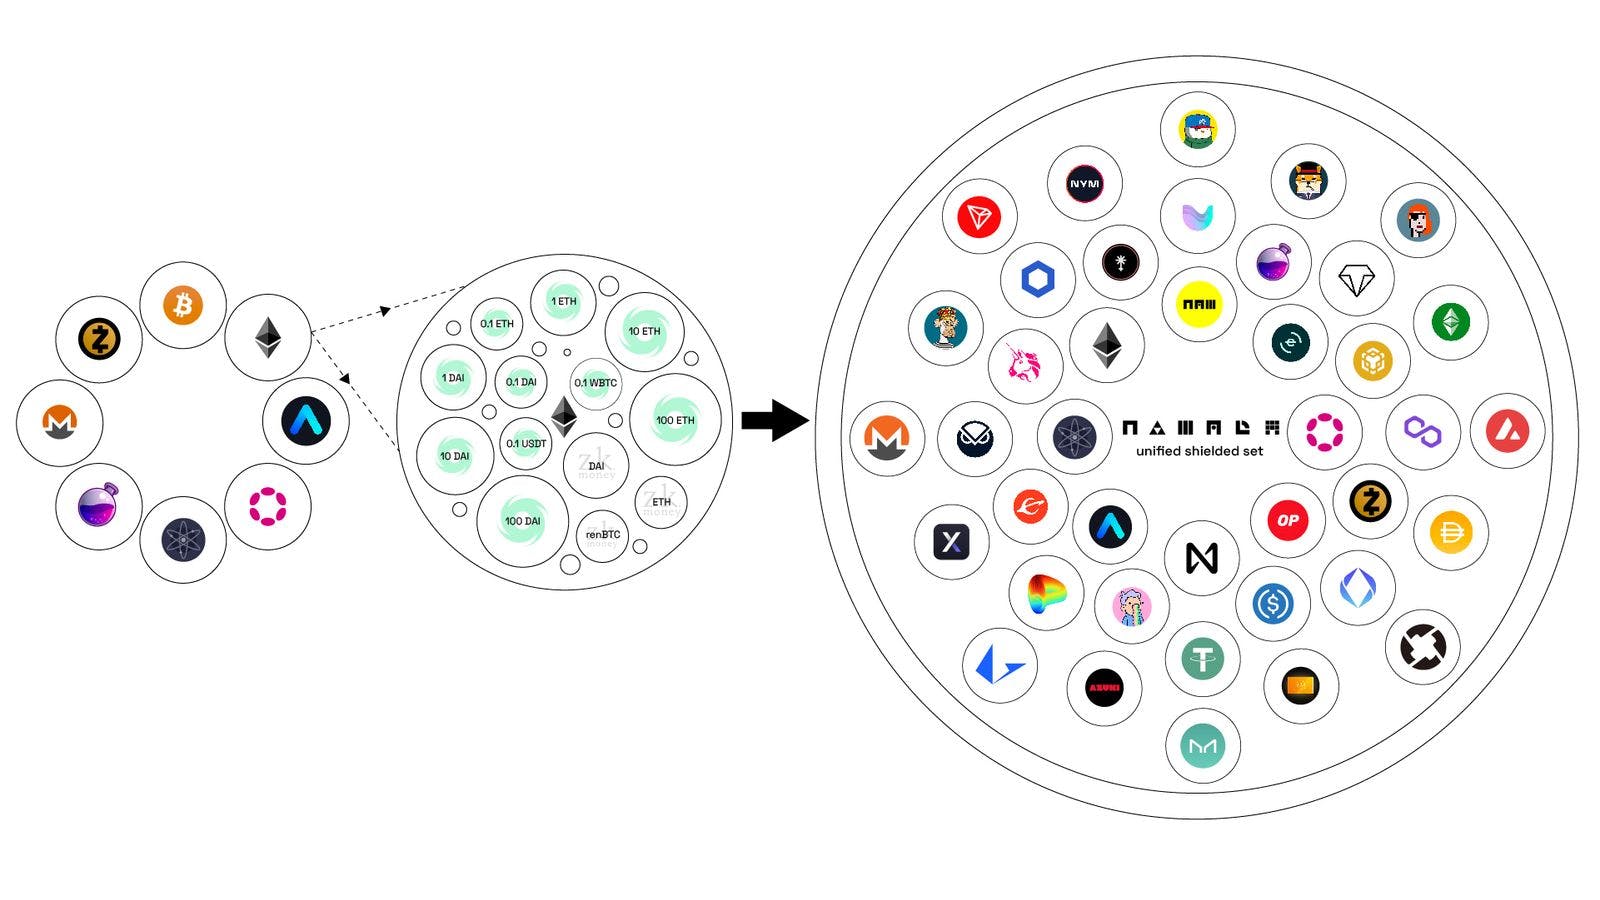 The above illustration shows how all tokens, whether fungible or non-fungible, share Namada’s Unified Shielded Set. The Shielded Set is the main architectural framework that enables the privacy-focused utility of the Namada platform. (Image Credit: Shaping Multichain Privacy via the Namada Blog)